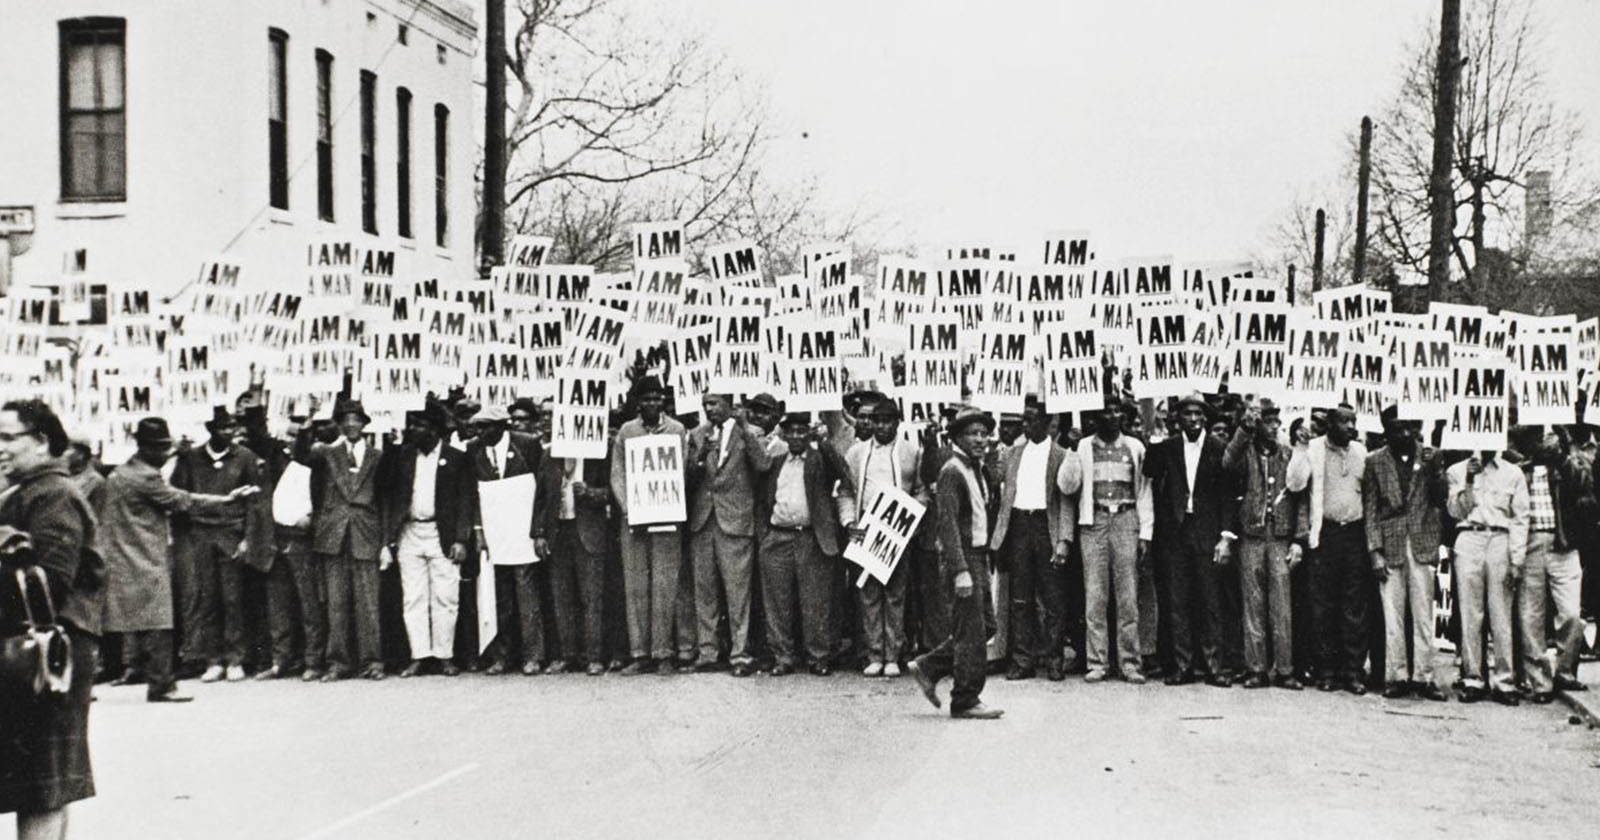  documentary explores civil rights photographer who was fbi 